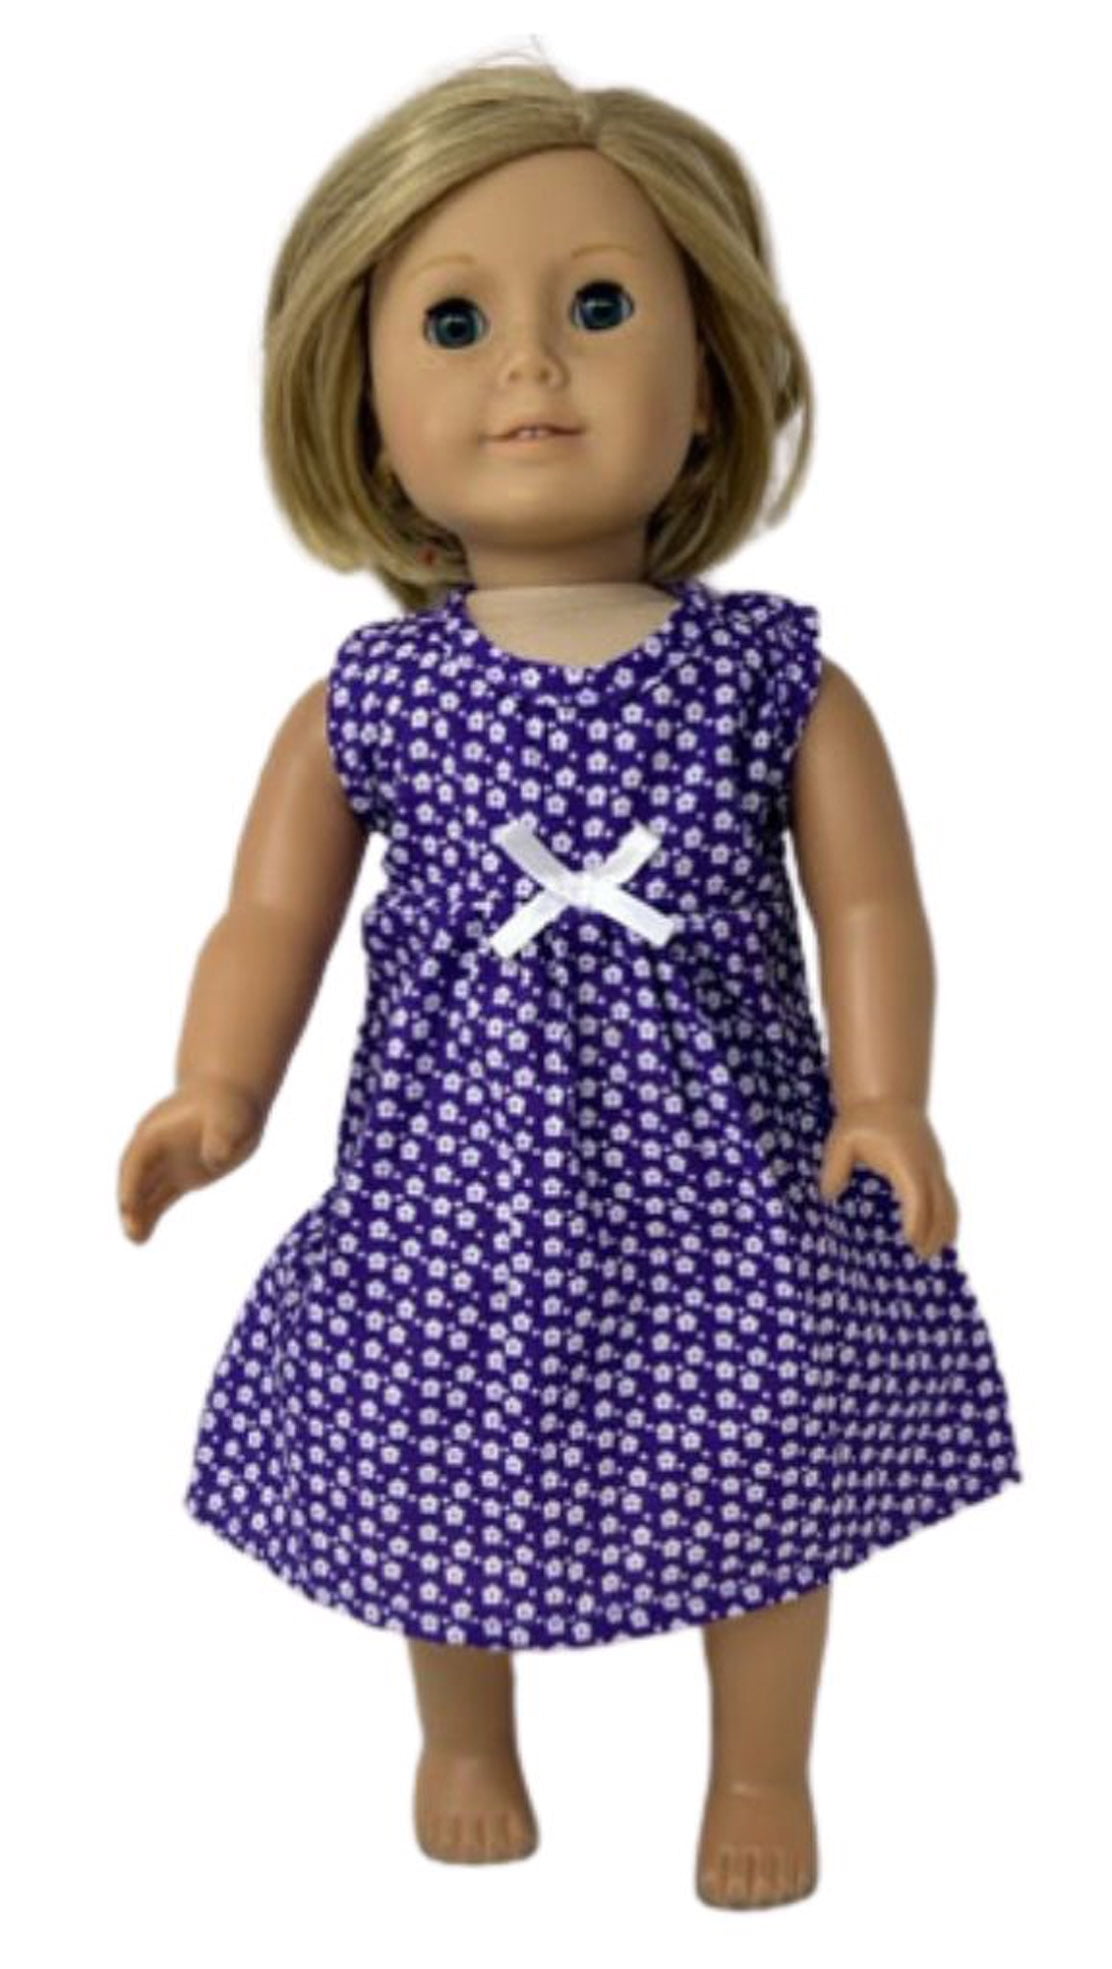 Doll Clothes Superstore Purple Flower Print Dress Fits 18 Inch Girl Dolls Like Our Generation